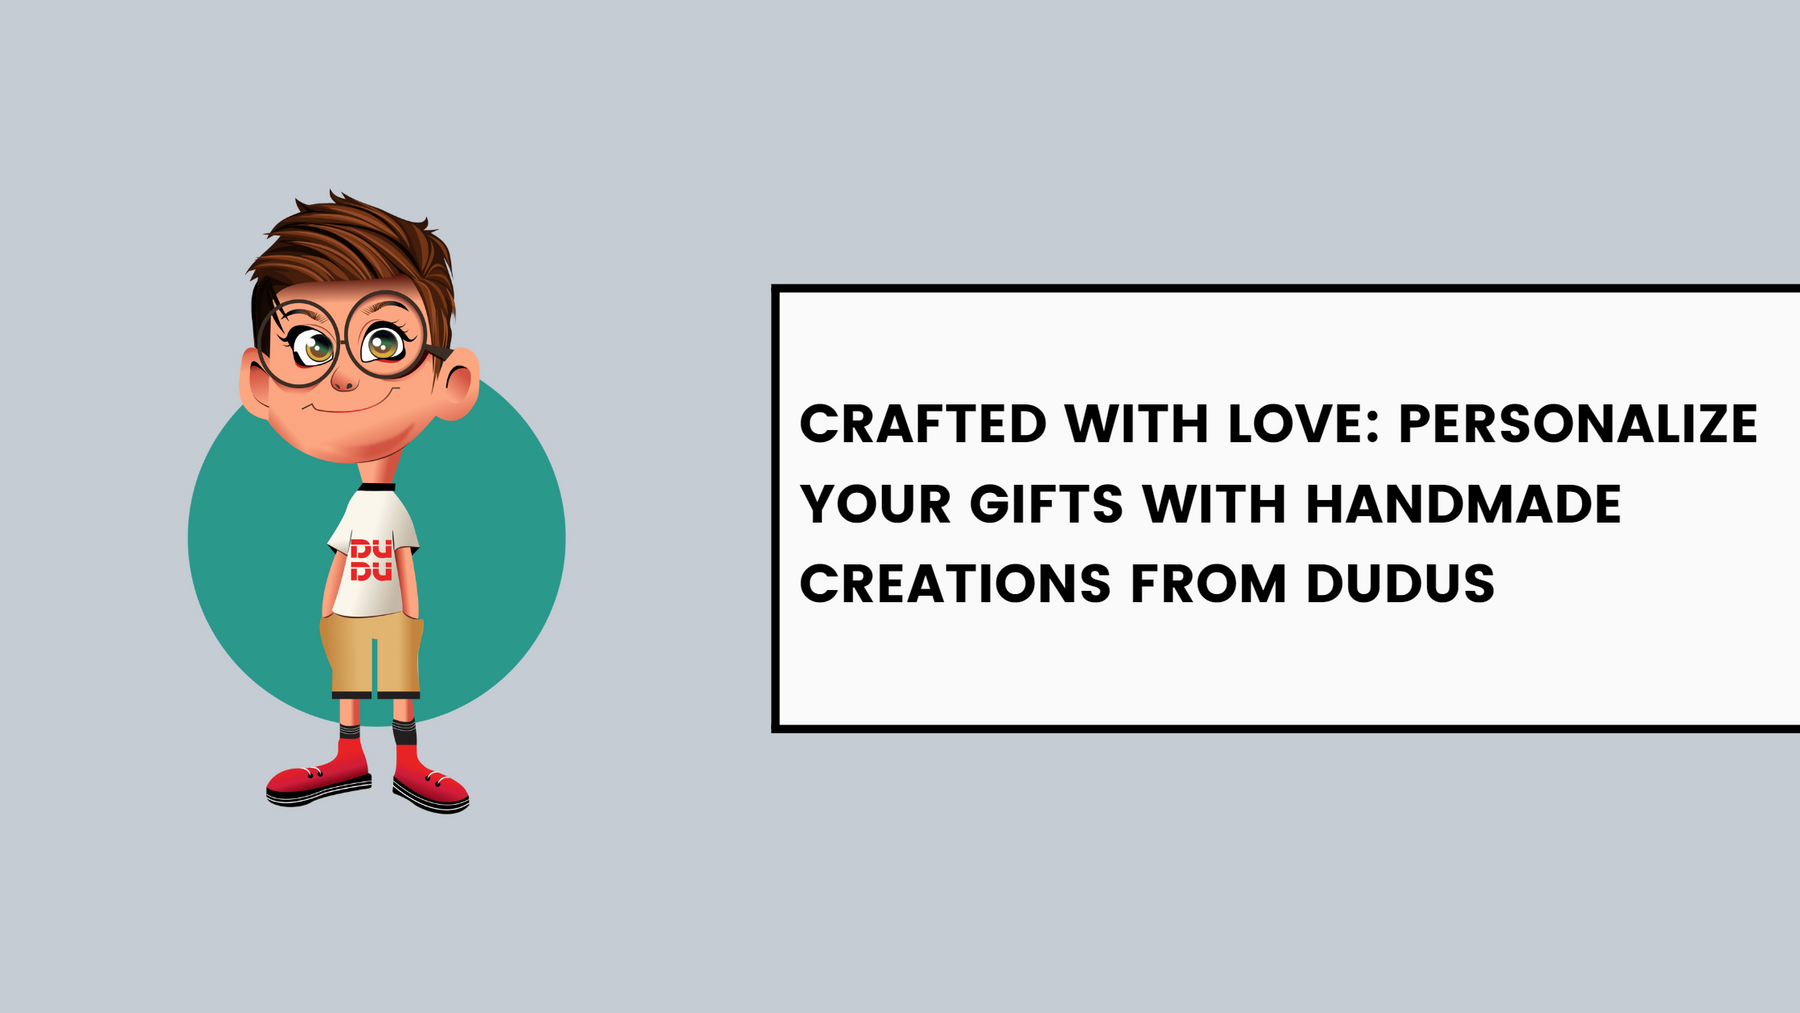 Crafted with Love: Personalize Your Gifts with Handmade Creations from Dudus